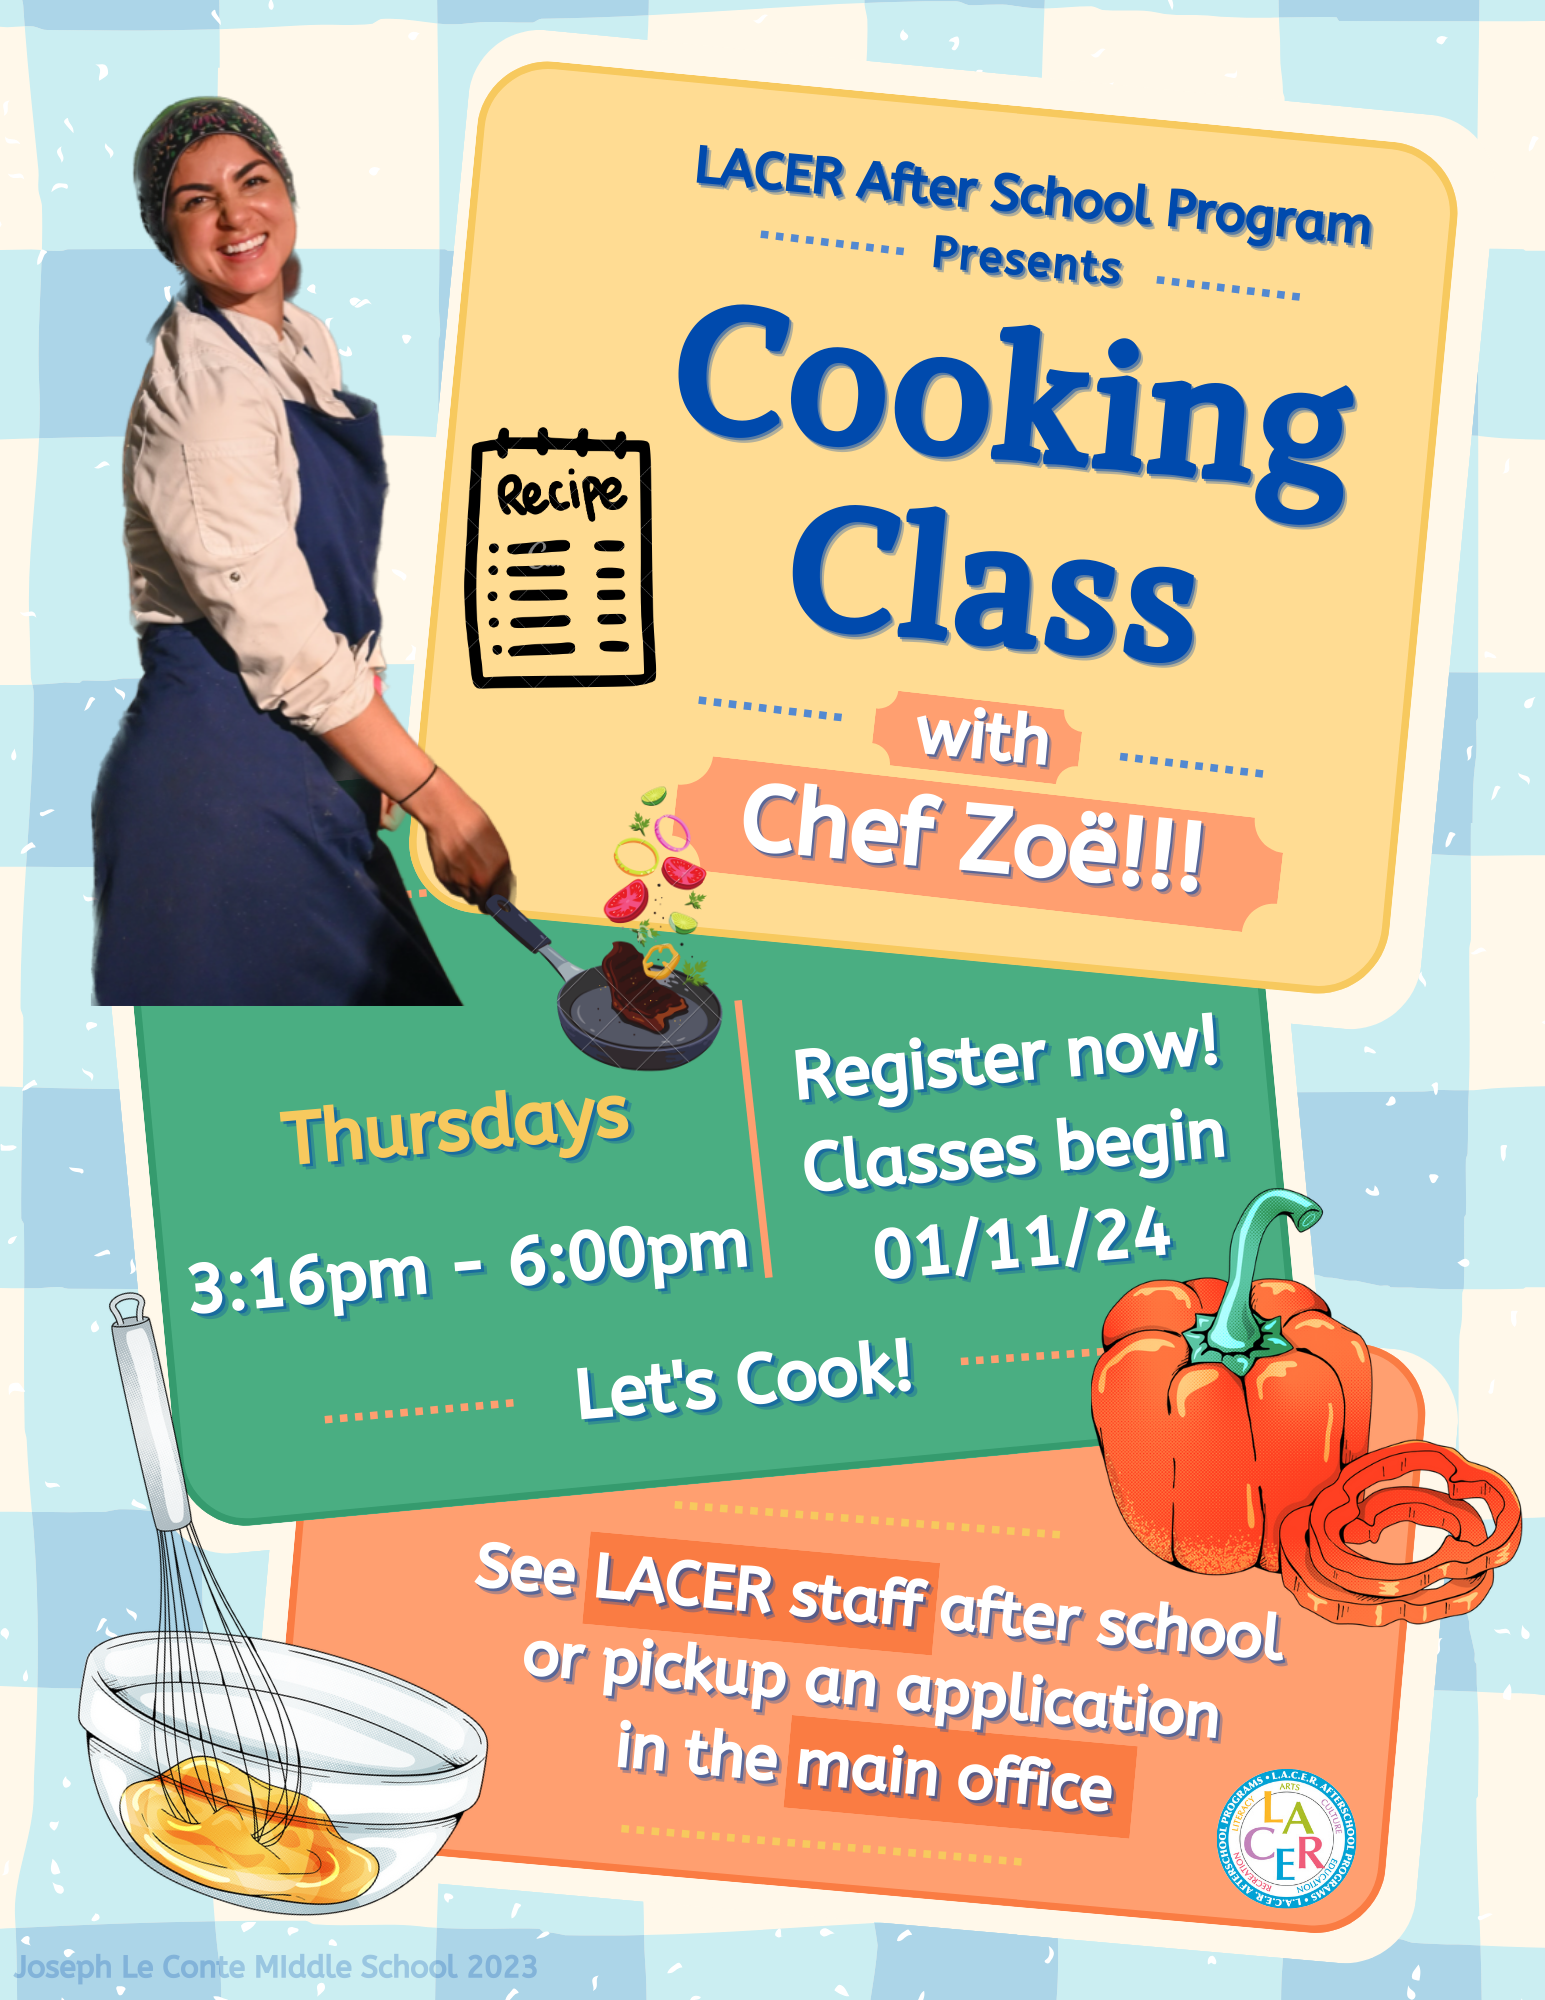 LACER Cooking Class w Chef Zoe 01.24.png